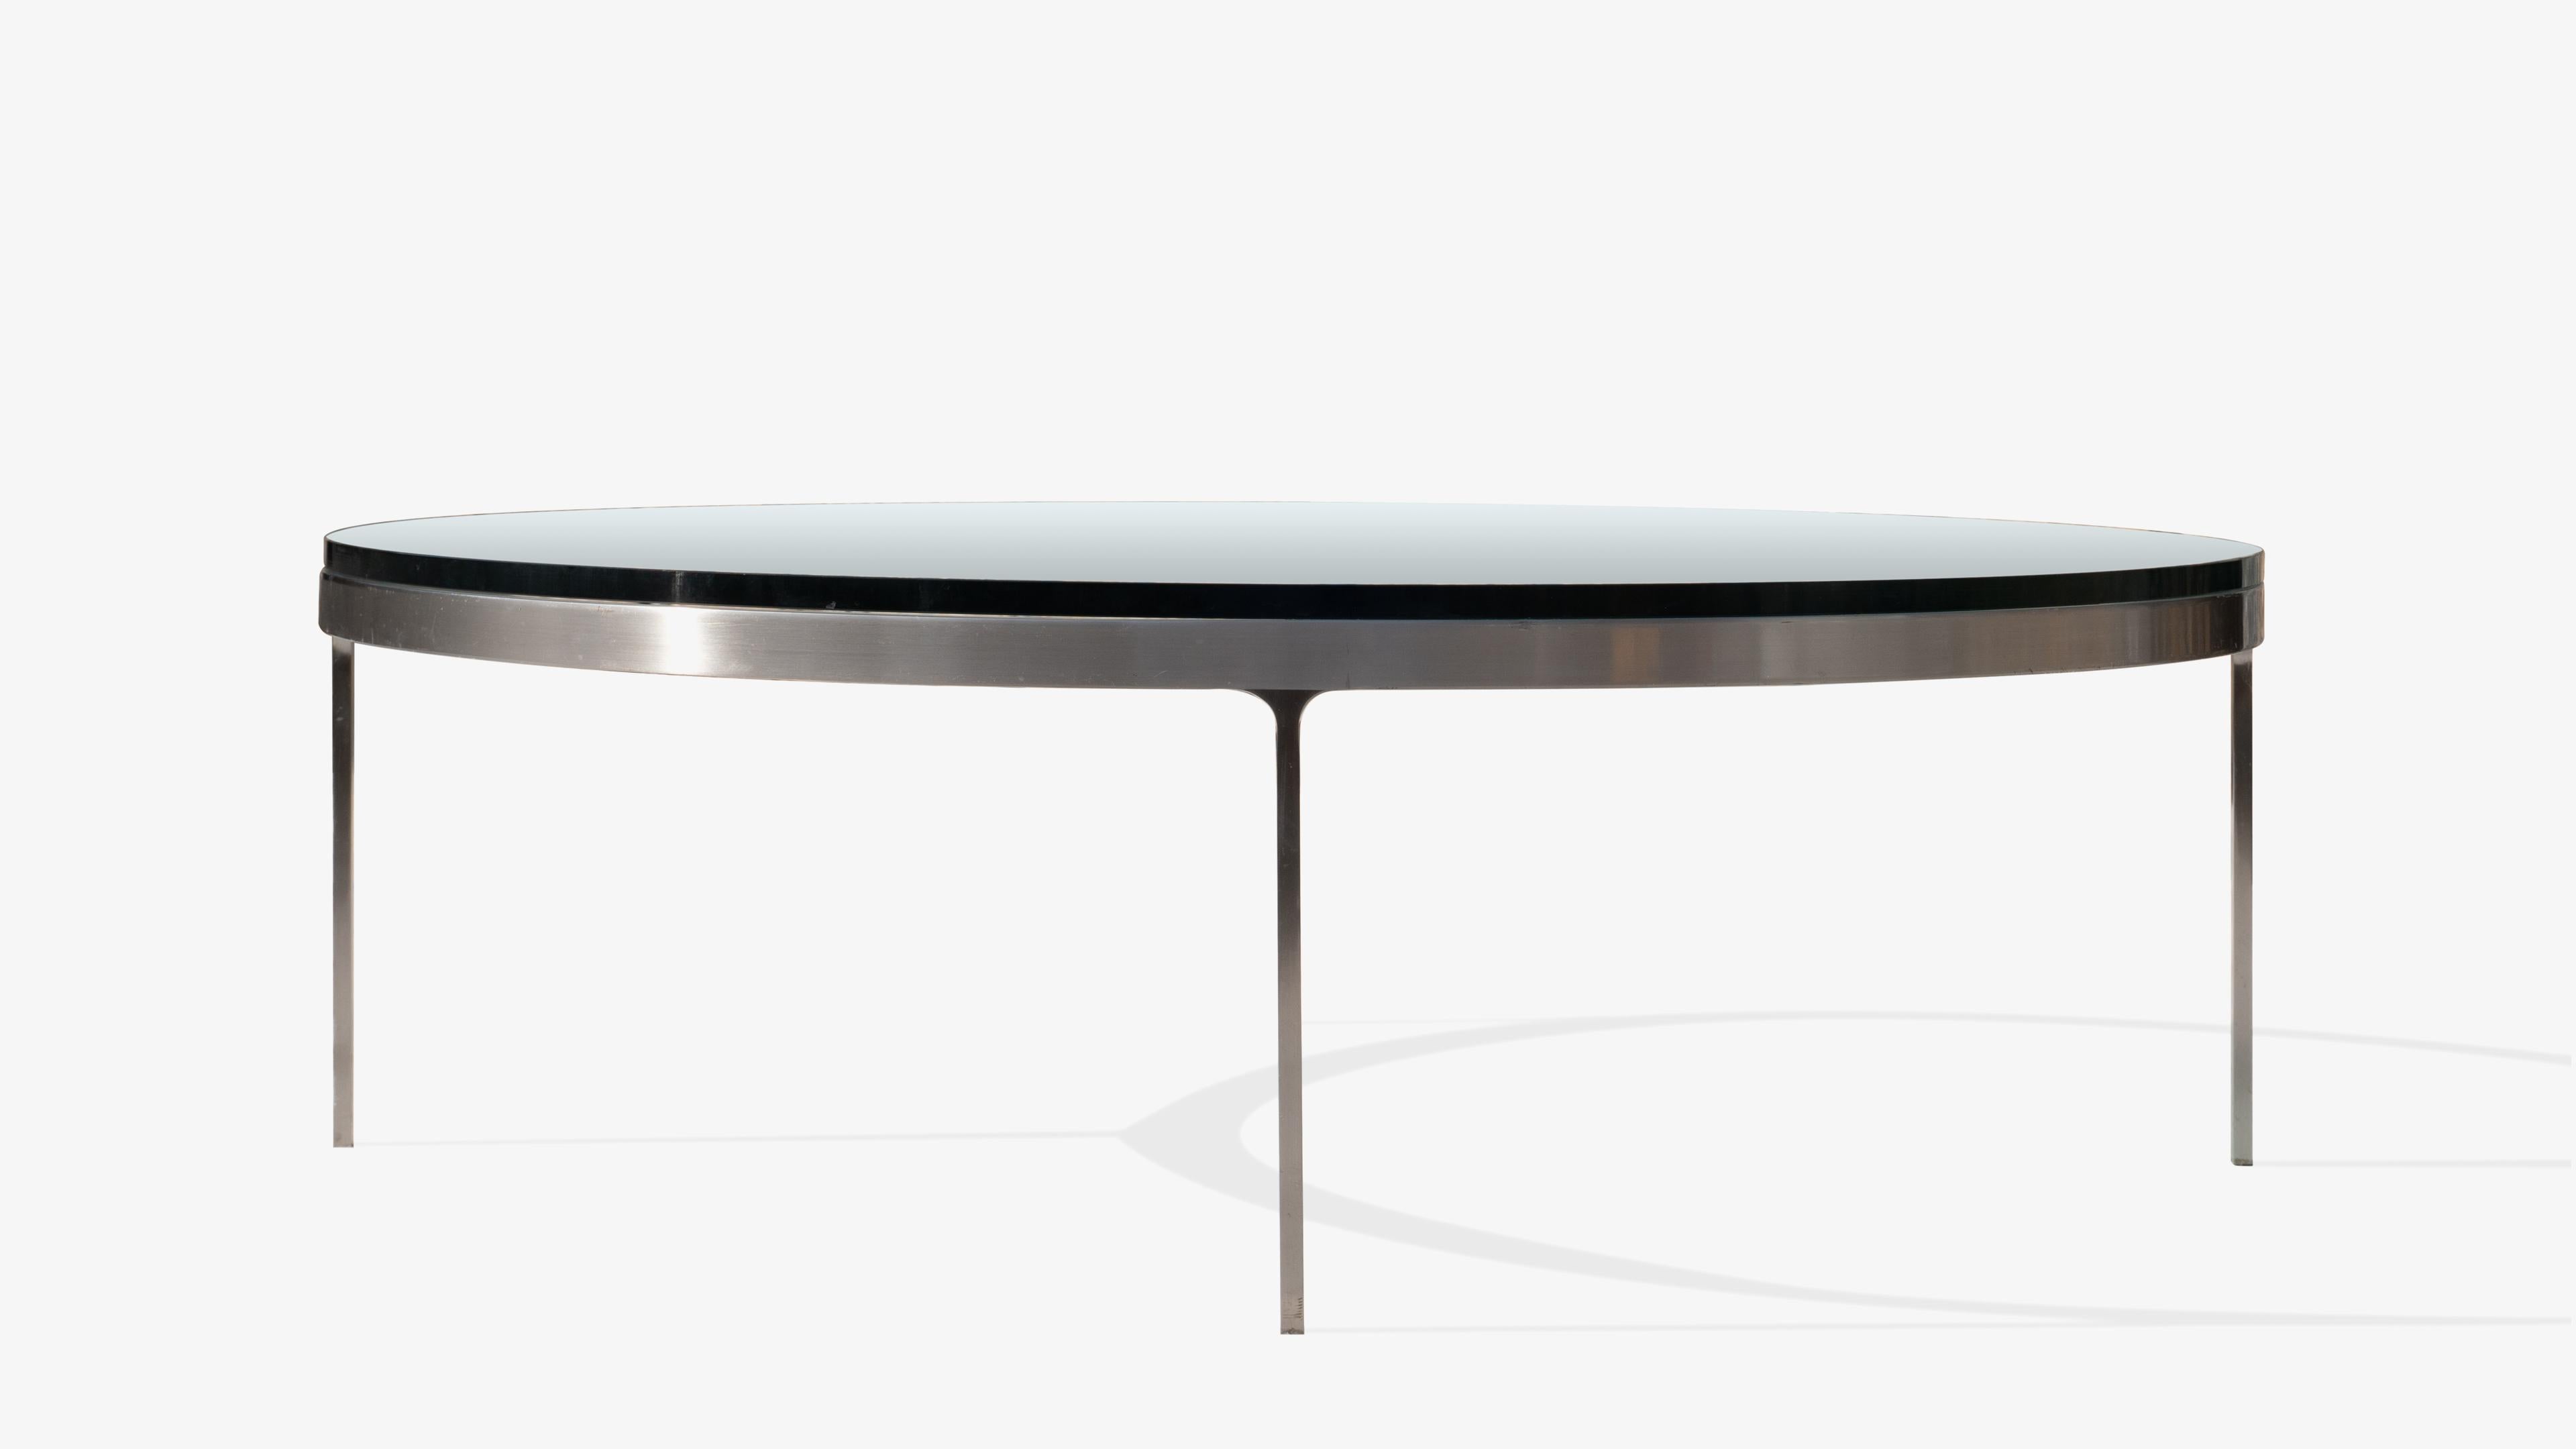 American Round Stainless Steel and Glass Cocktail TA35 Cocktail Table by Nicos Zographos